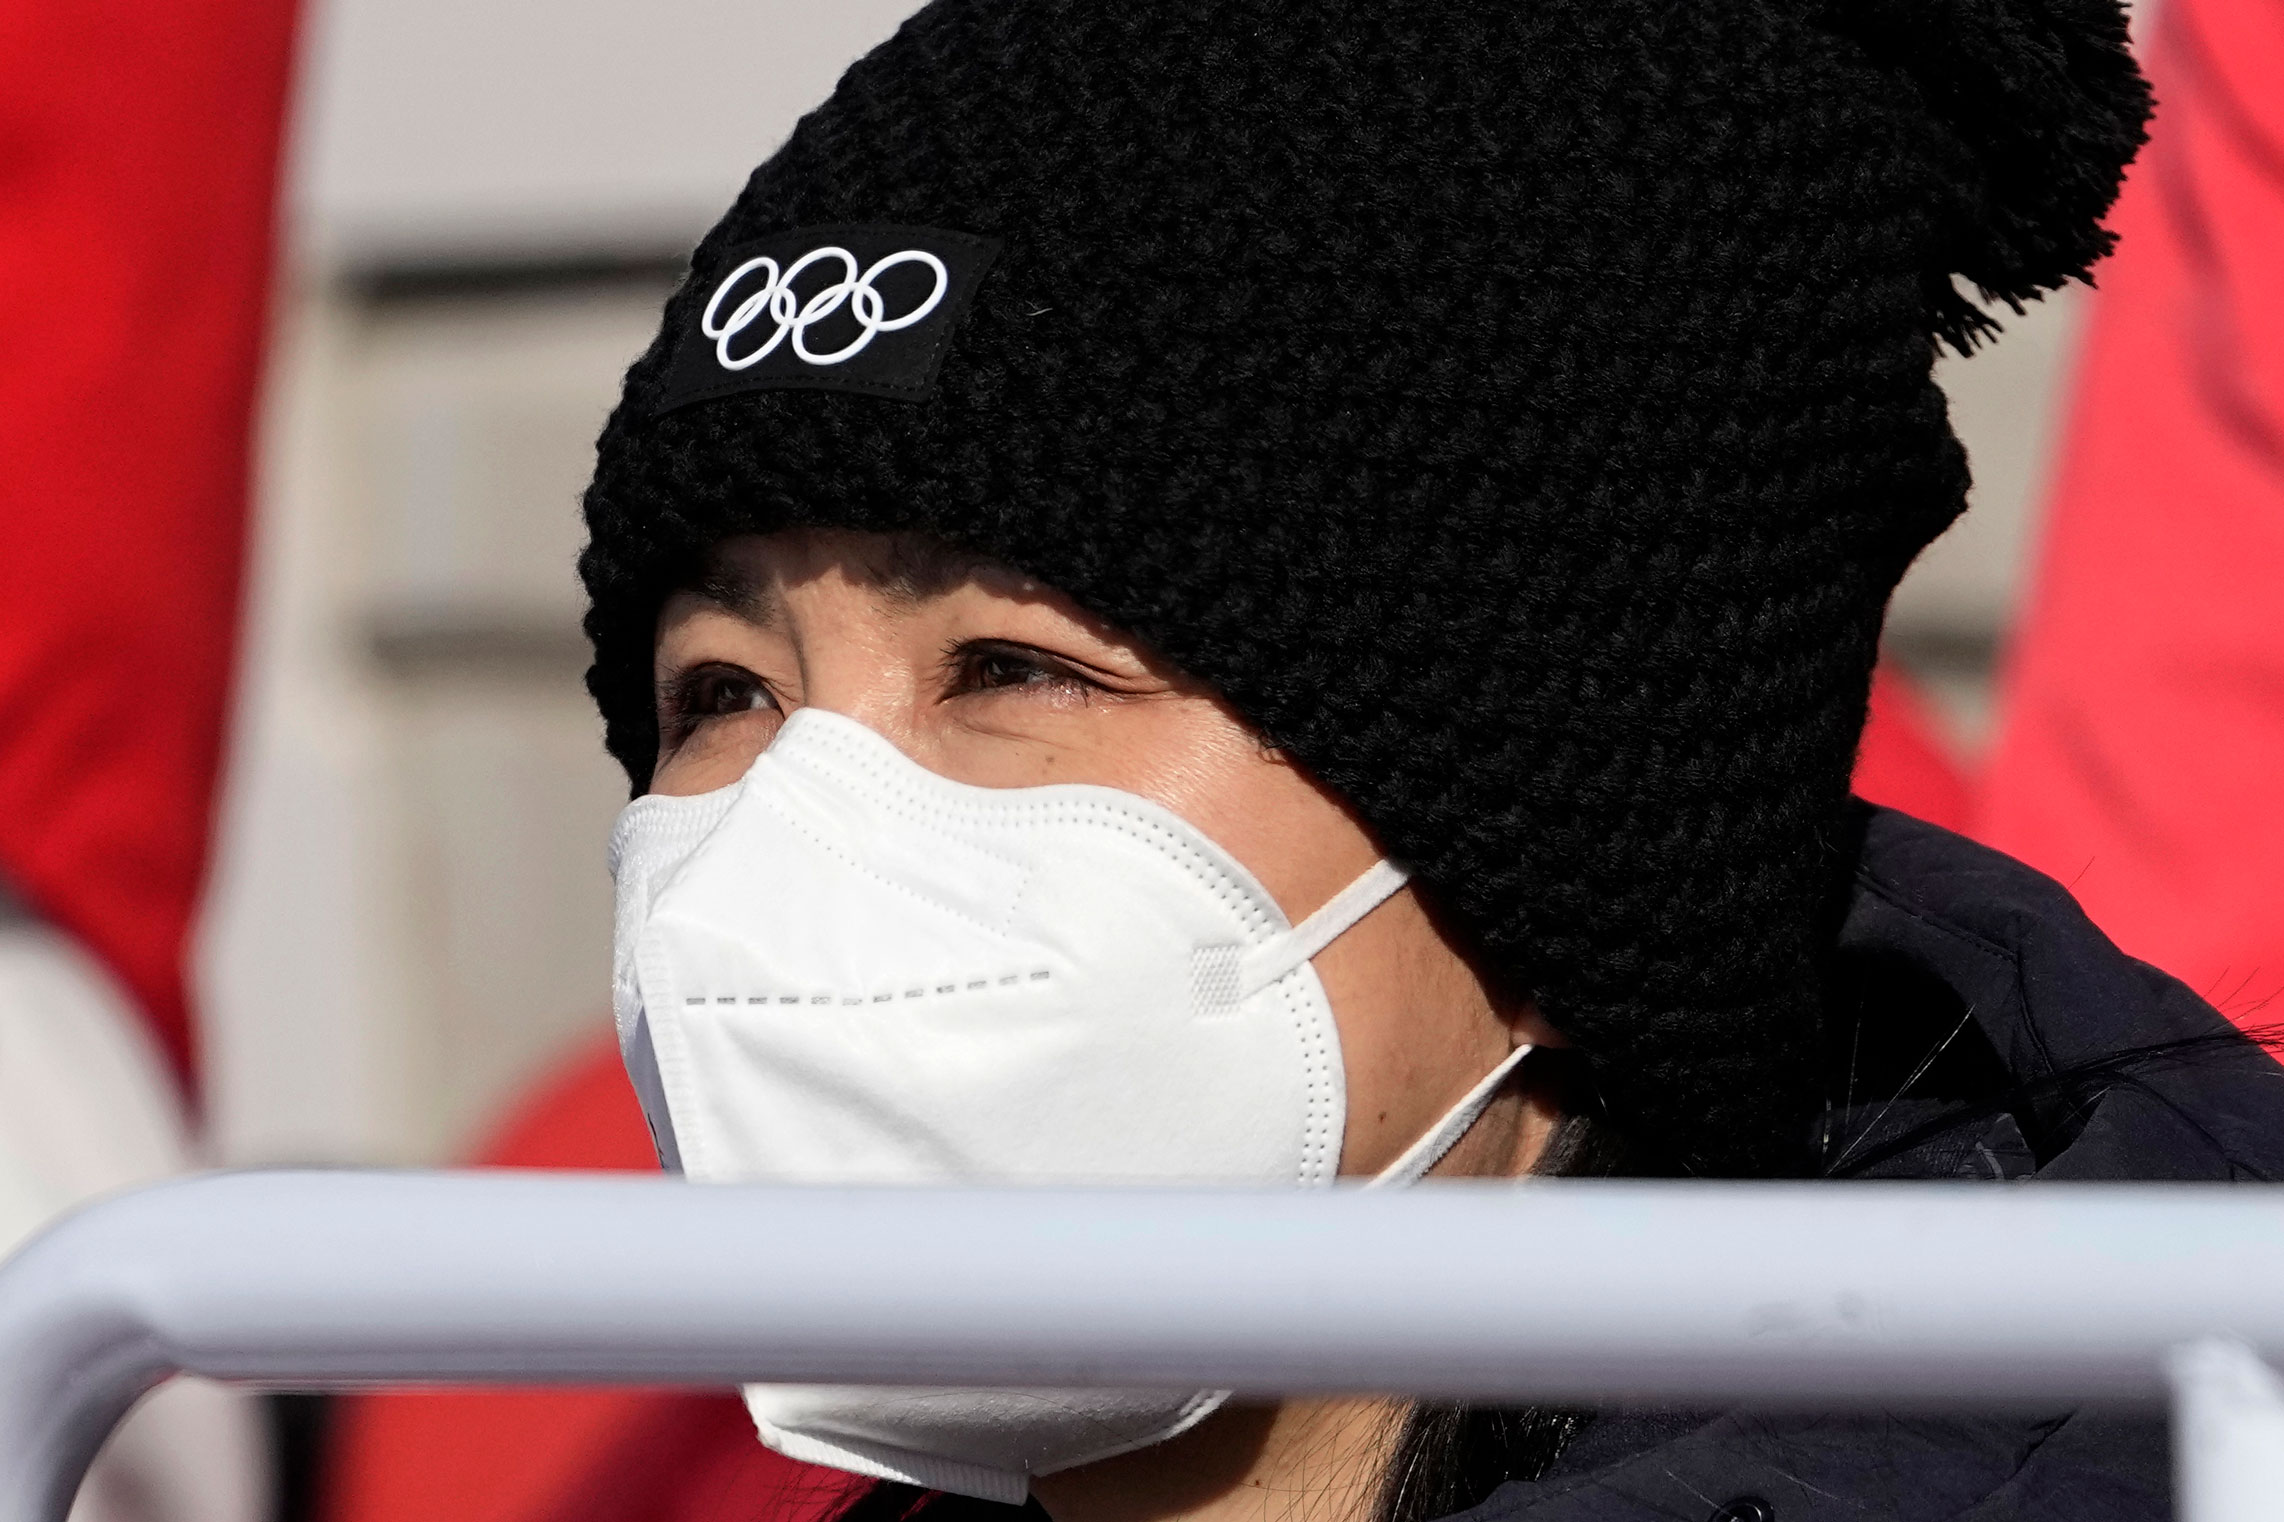 Chinese tennis star Peng Shuai watches the women's freestyle skiing big air finals on Tuesday.